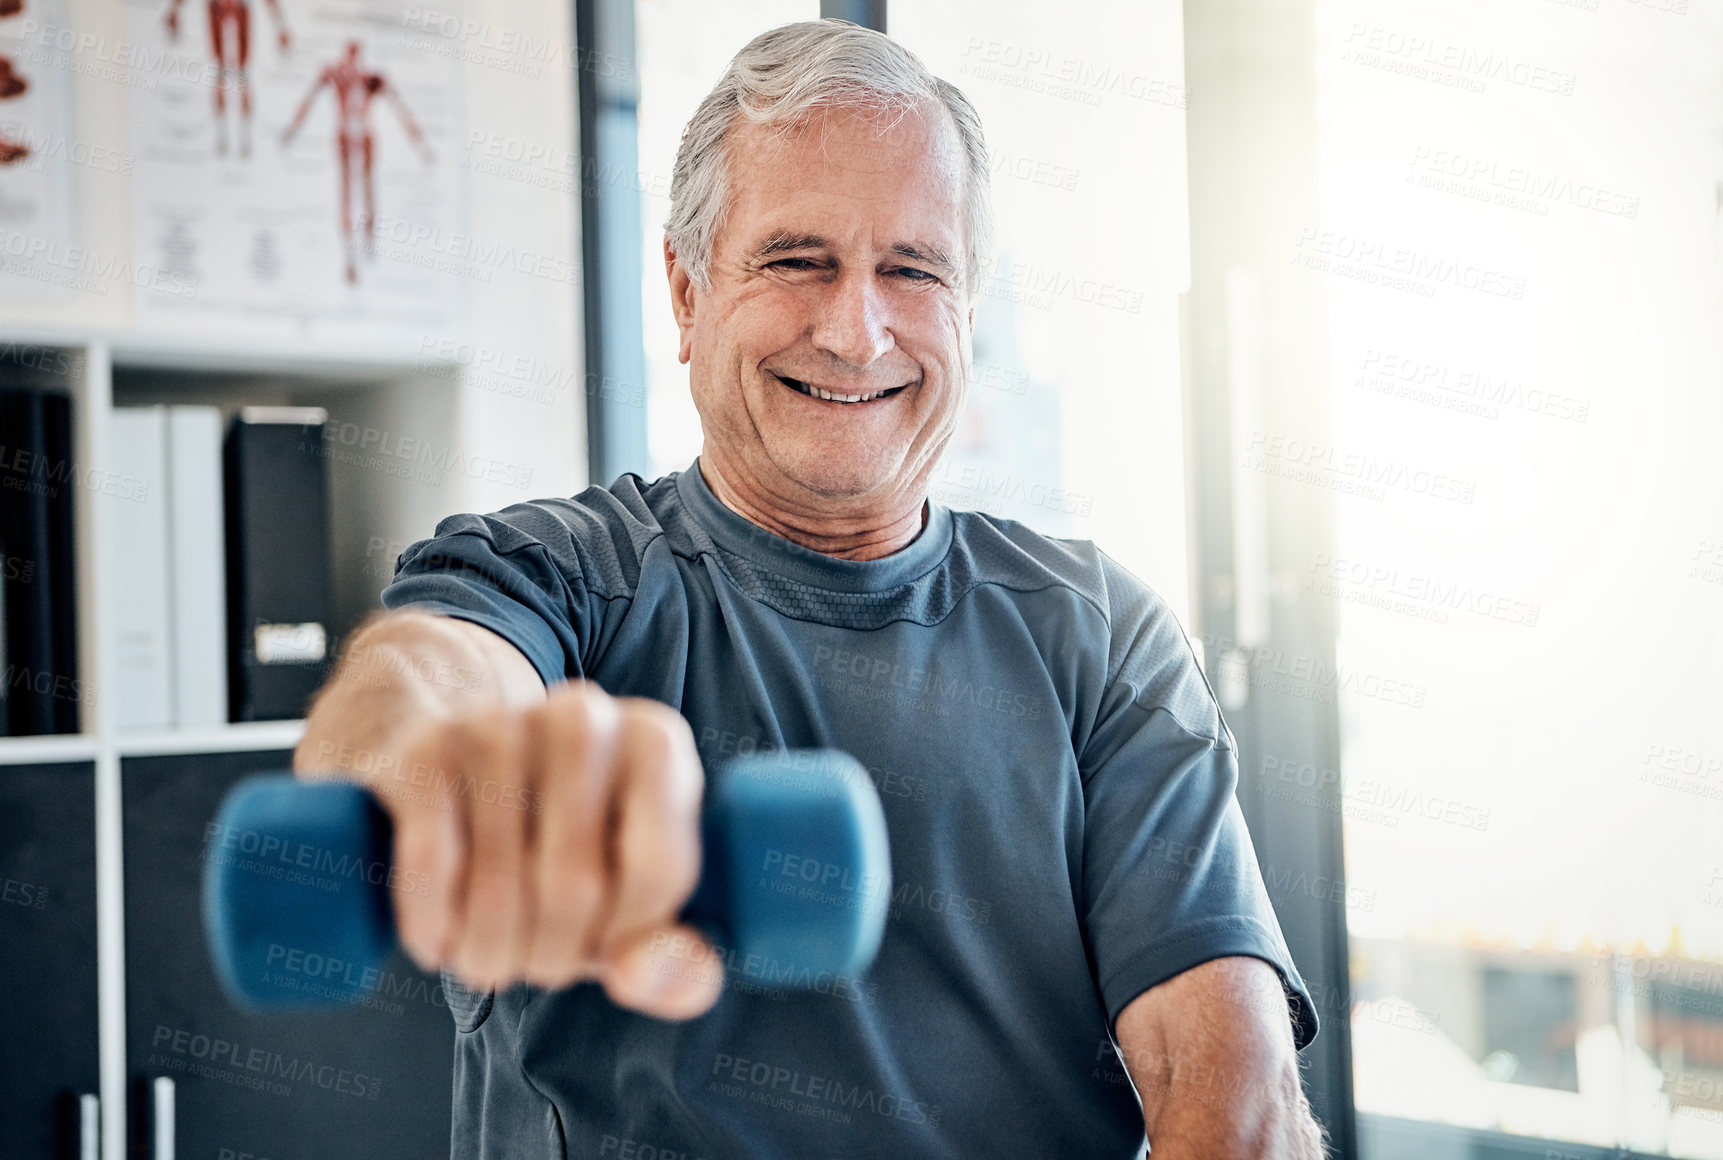 Buy stock photo Shot of an elderly man working out with weights at a rehabilitation center